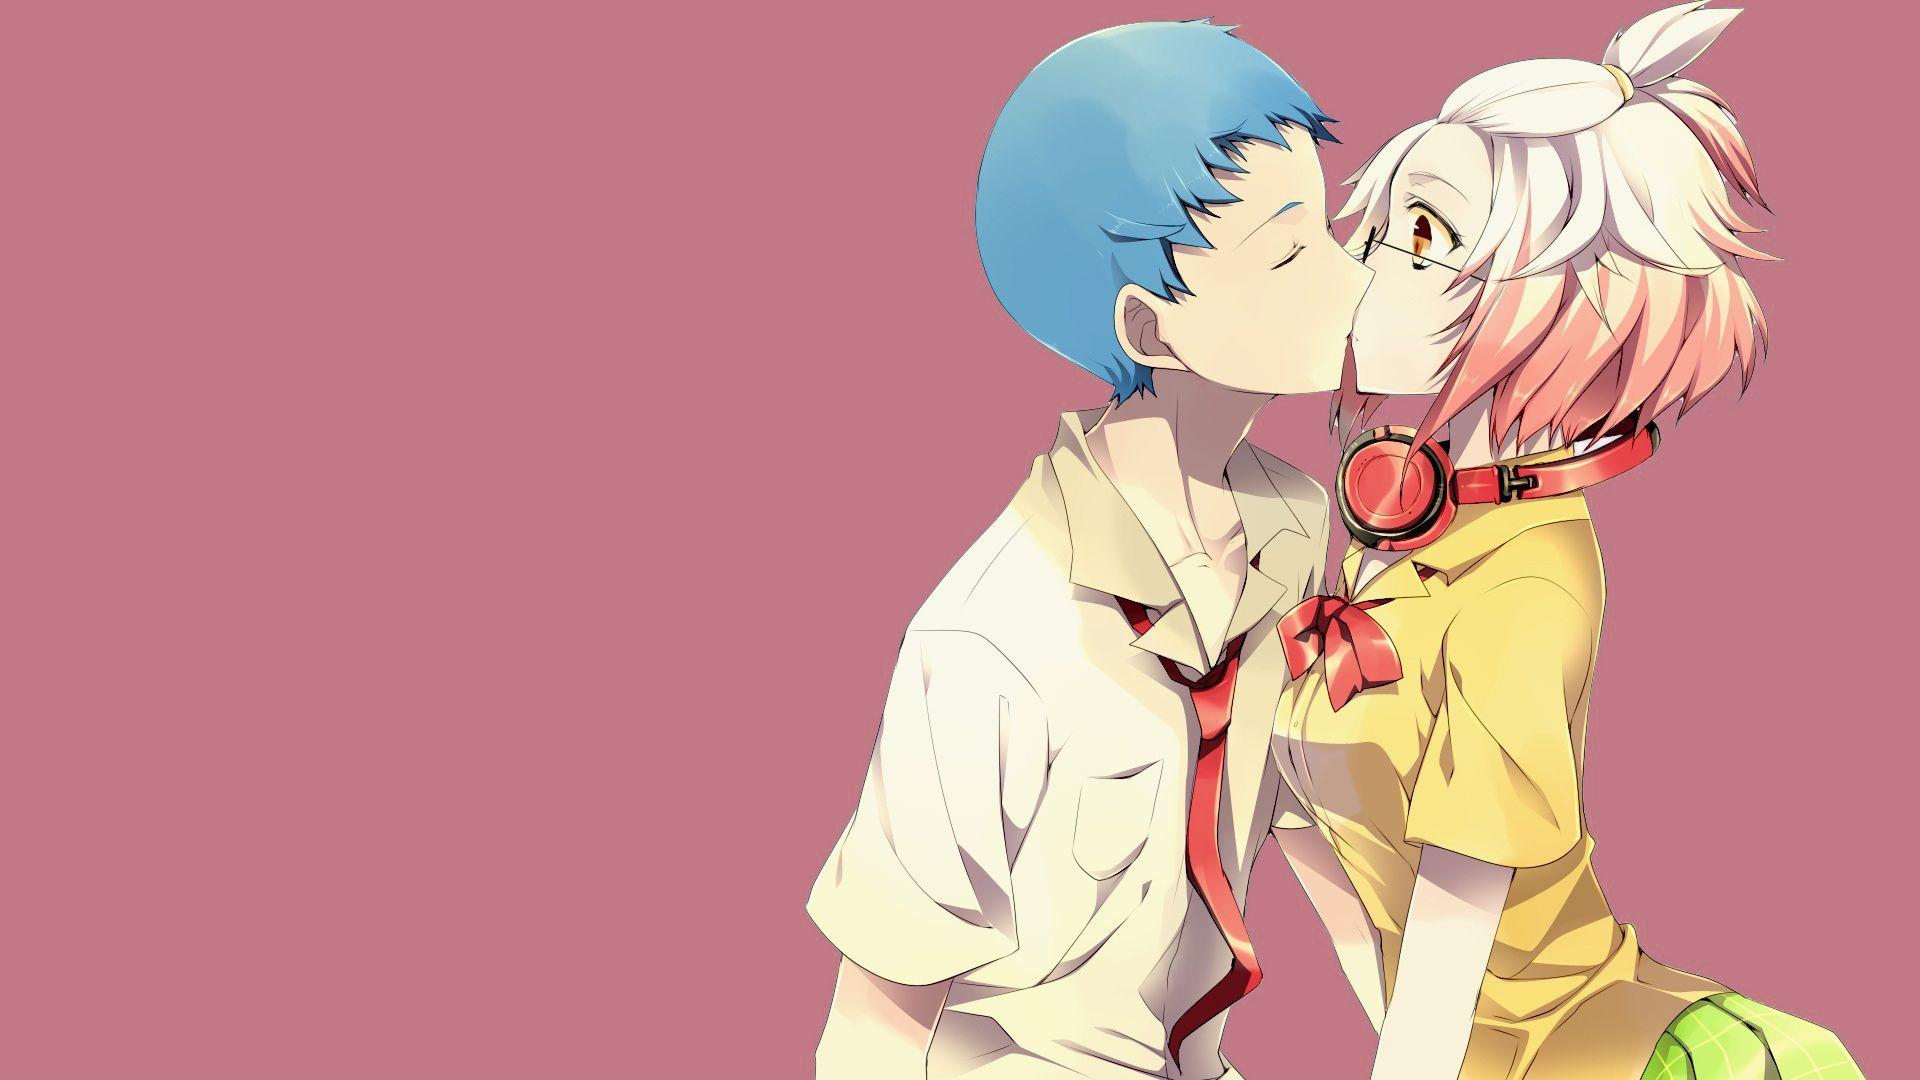 Wallpaper.wiki Cute Anime Couple Photo Download Free PIC WPE0010868